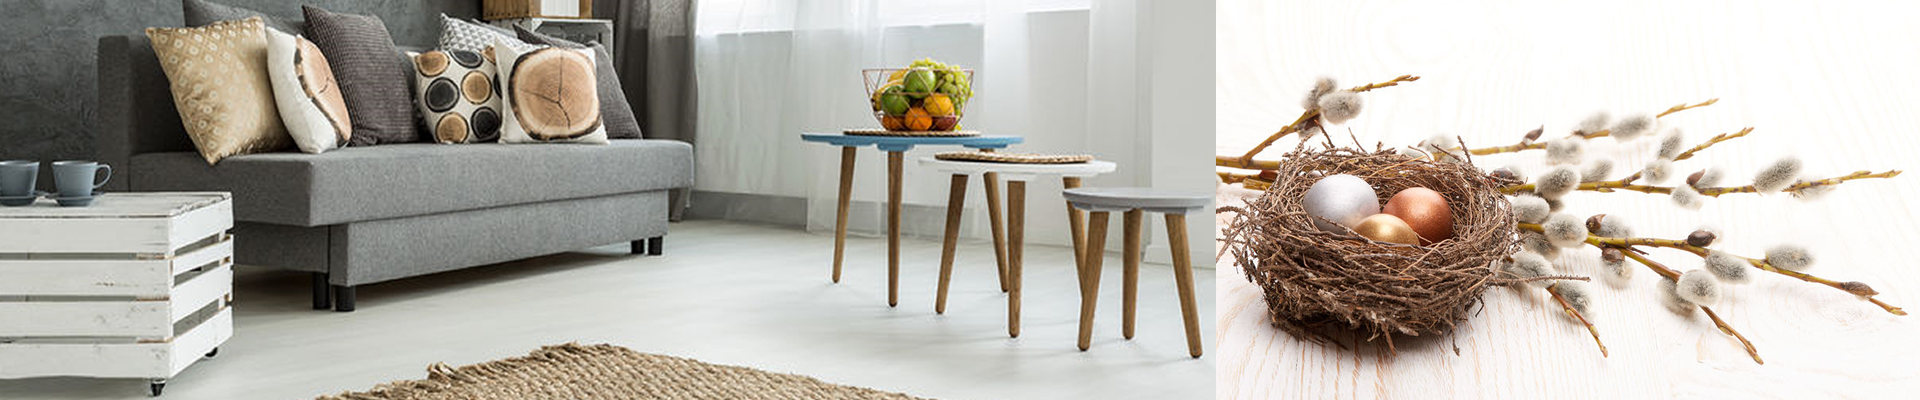 Nest Of Tables | Nesting Tables for the Living Room